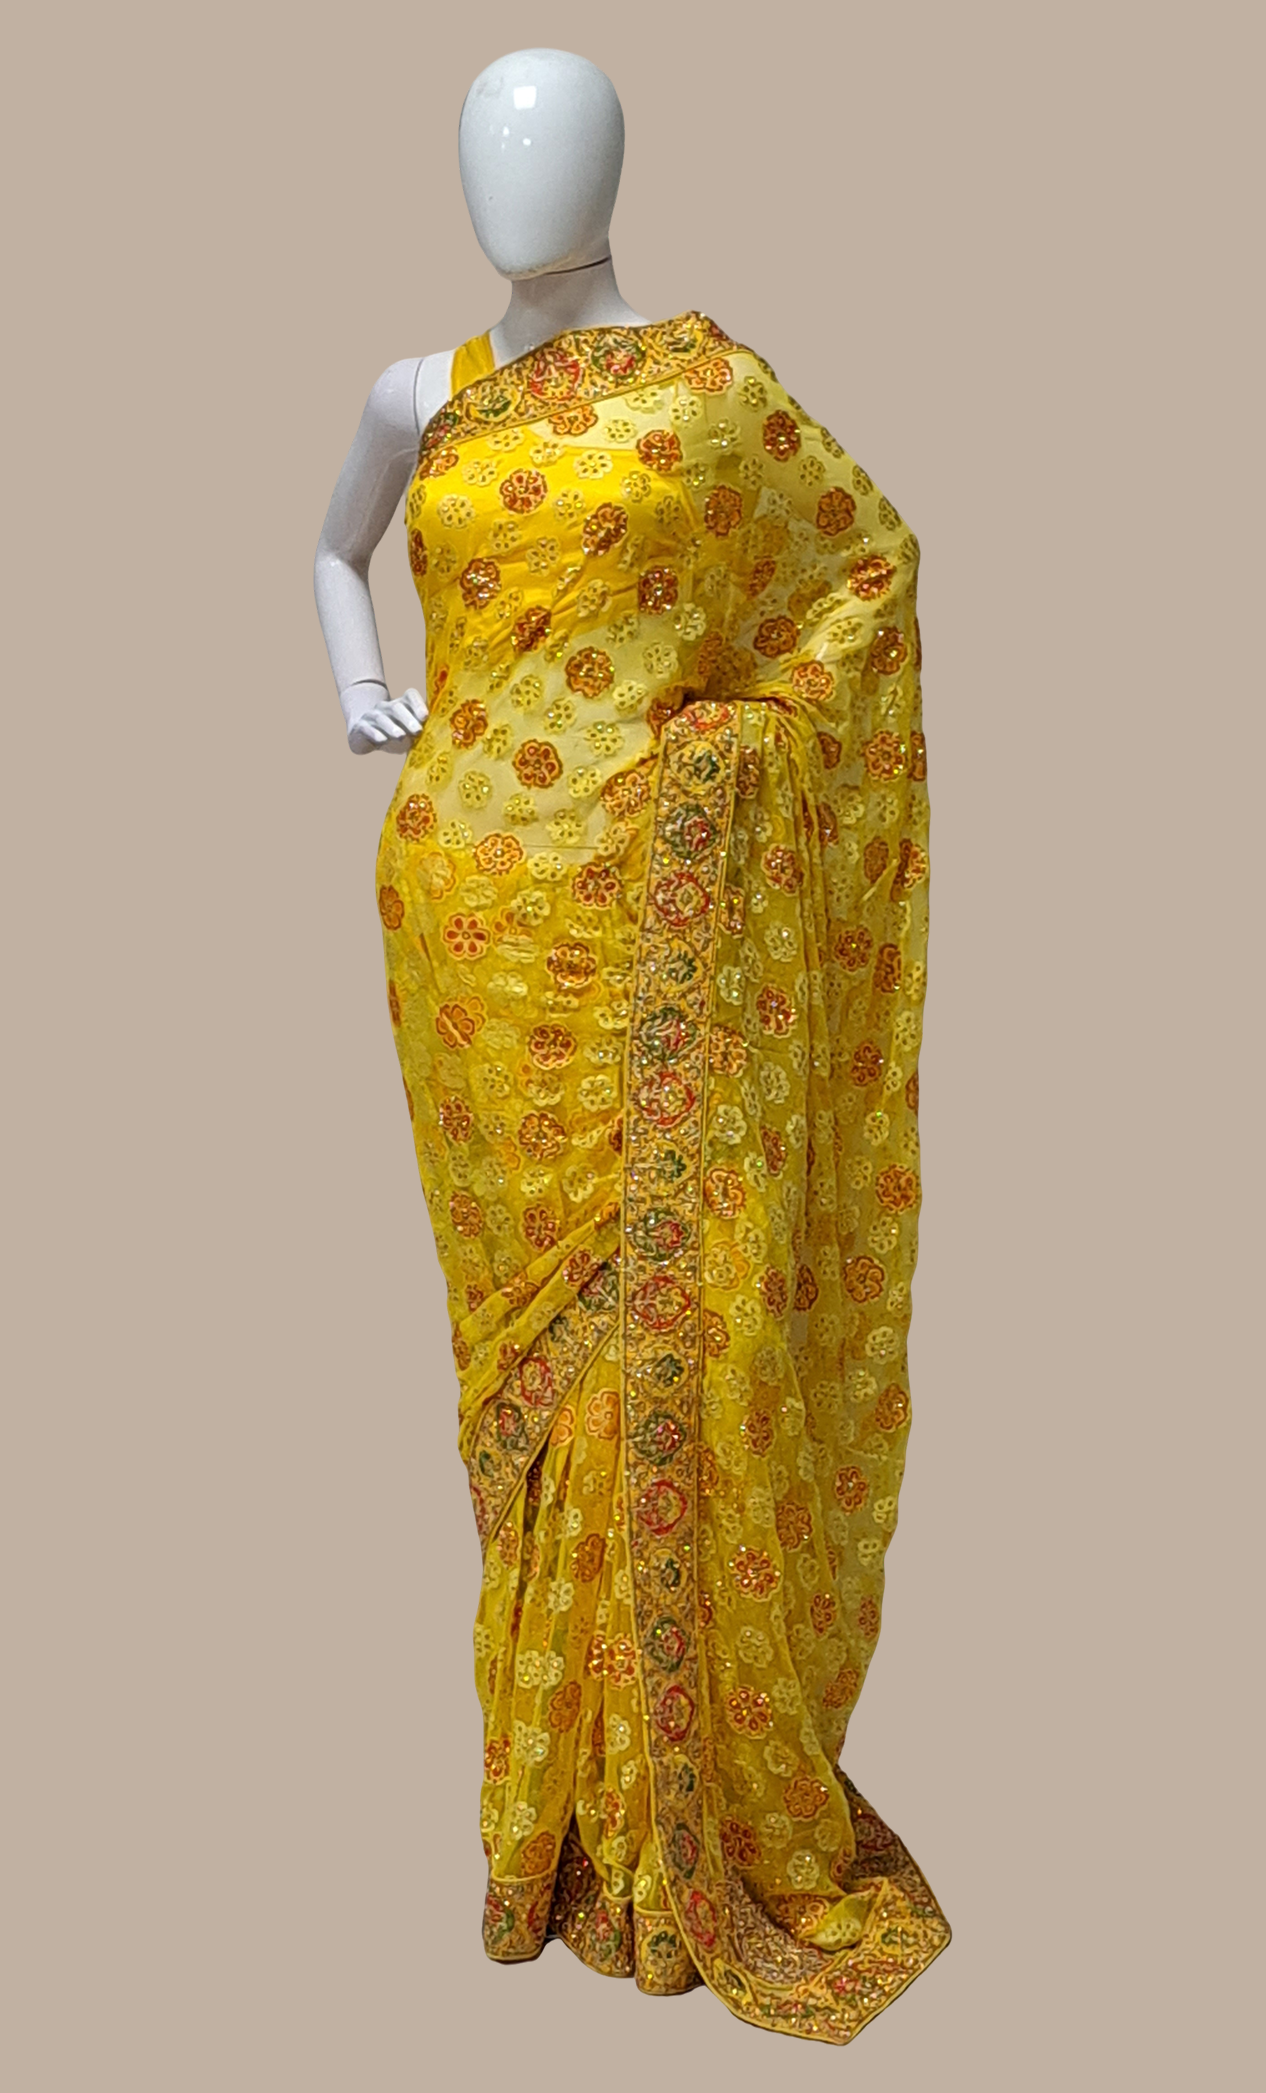 Canary Yellow Embroidered Sari